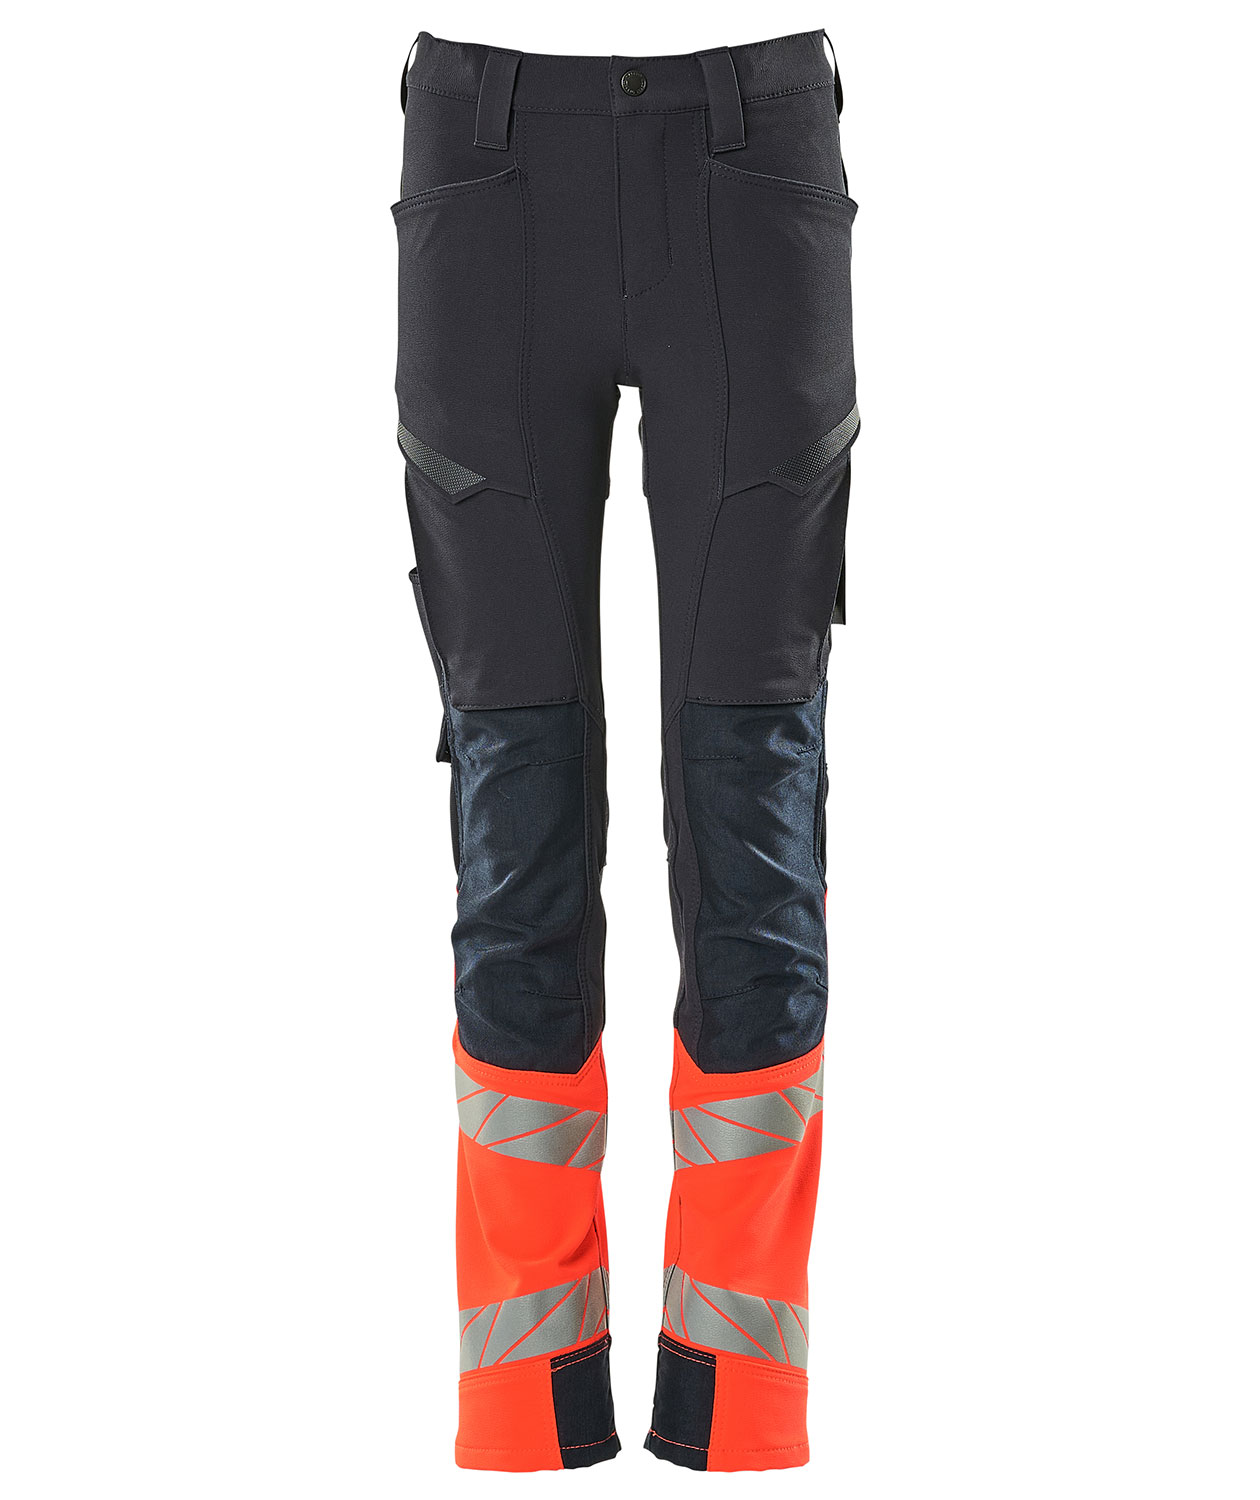 New range of kids work trousers and... - Fane Valley Stores | Facebook